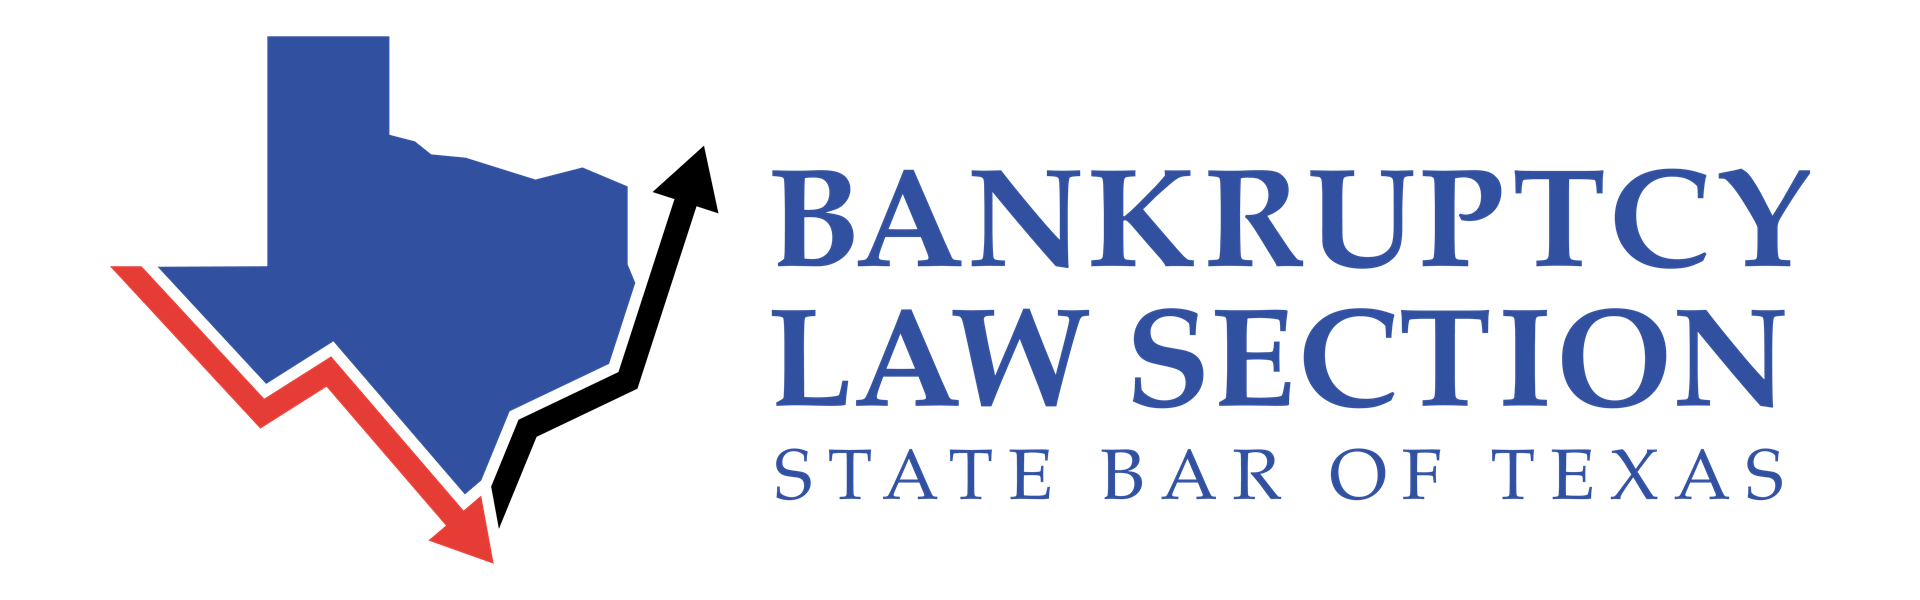 State Bar of Texas Bankruptcy Section - Southern District of Texas ...